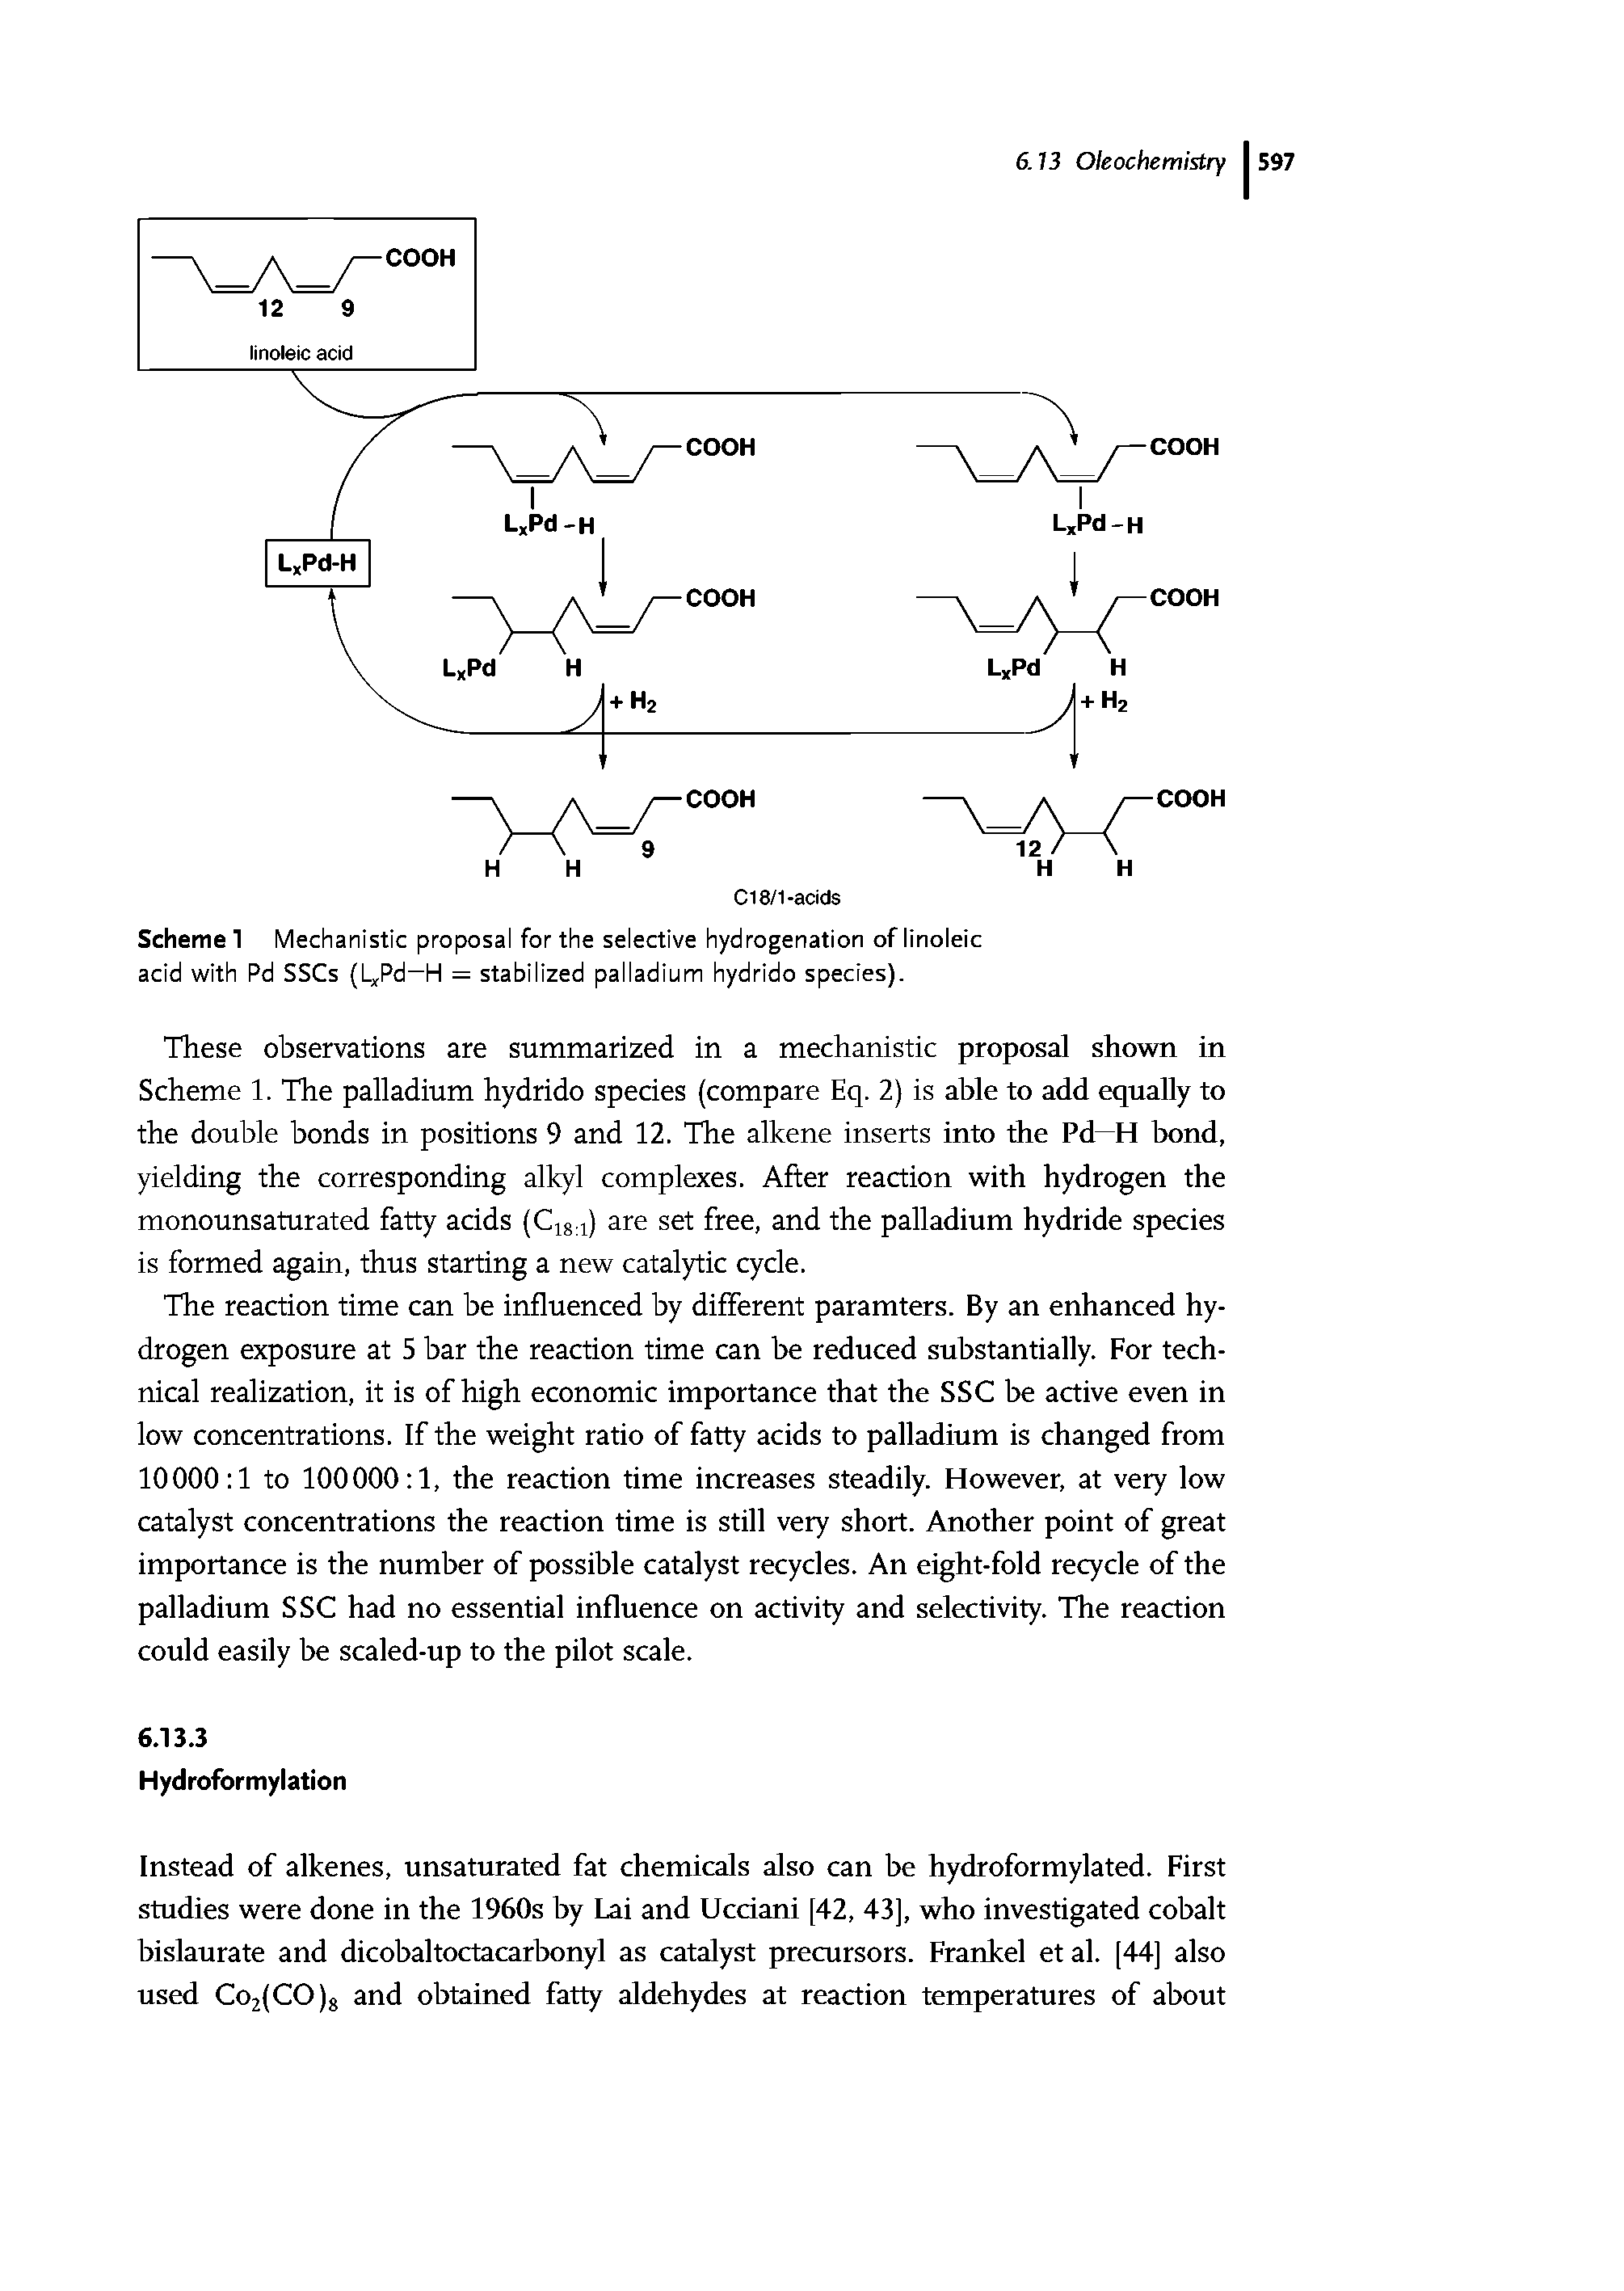 Scheme 1 Mechanistic proposal for the selective hydrogenation of linoleic acid with Pd SSCs (L,Pd—H = stabilized palladium hydrido species).